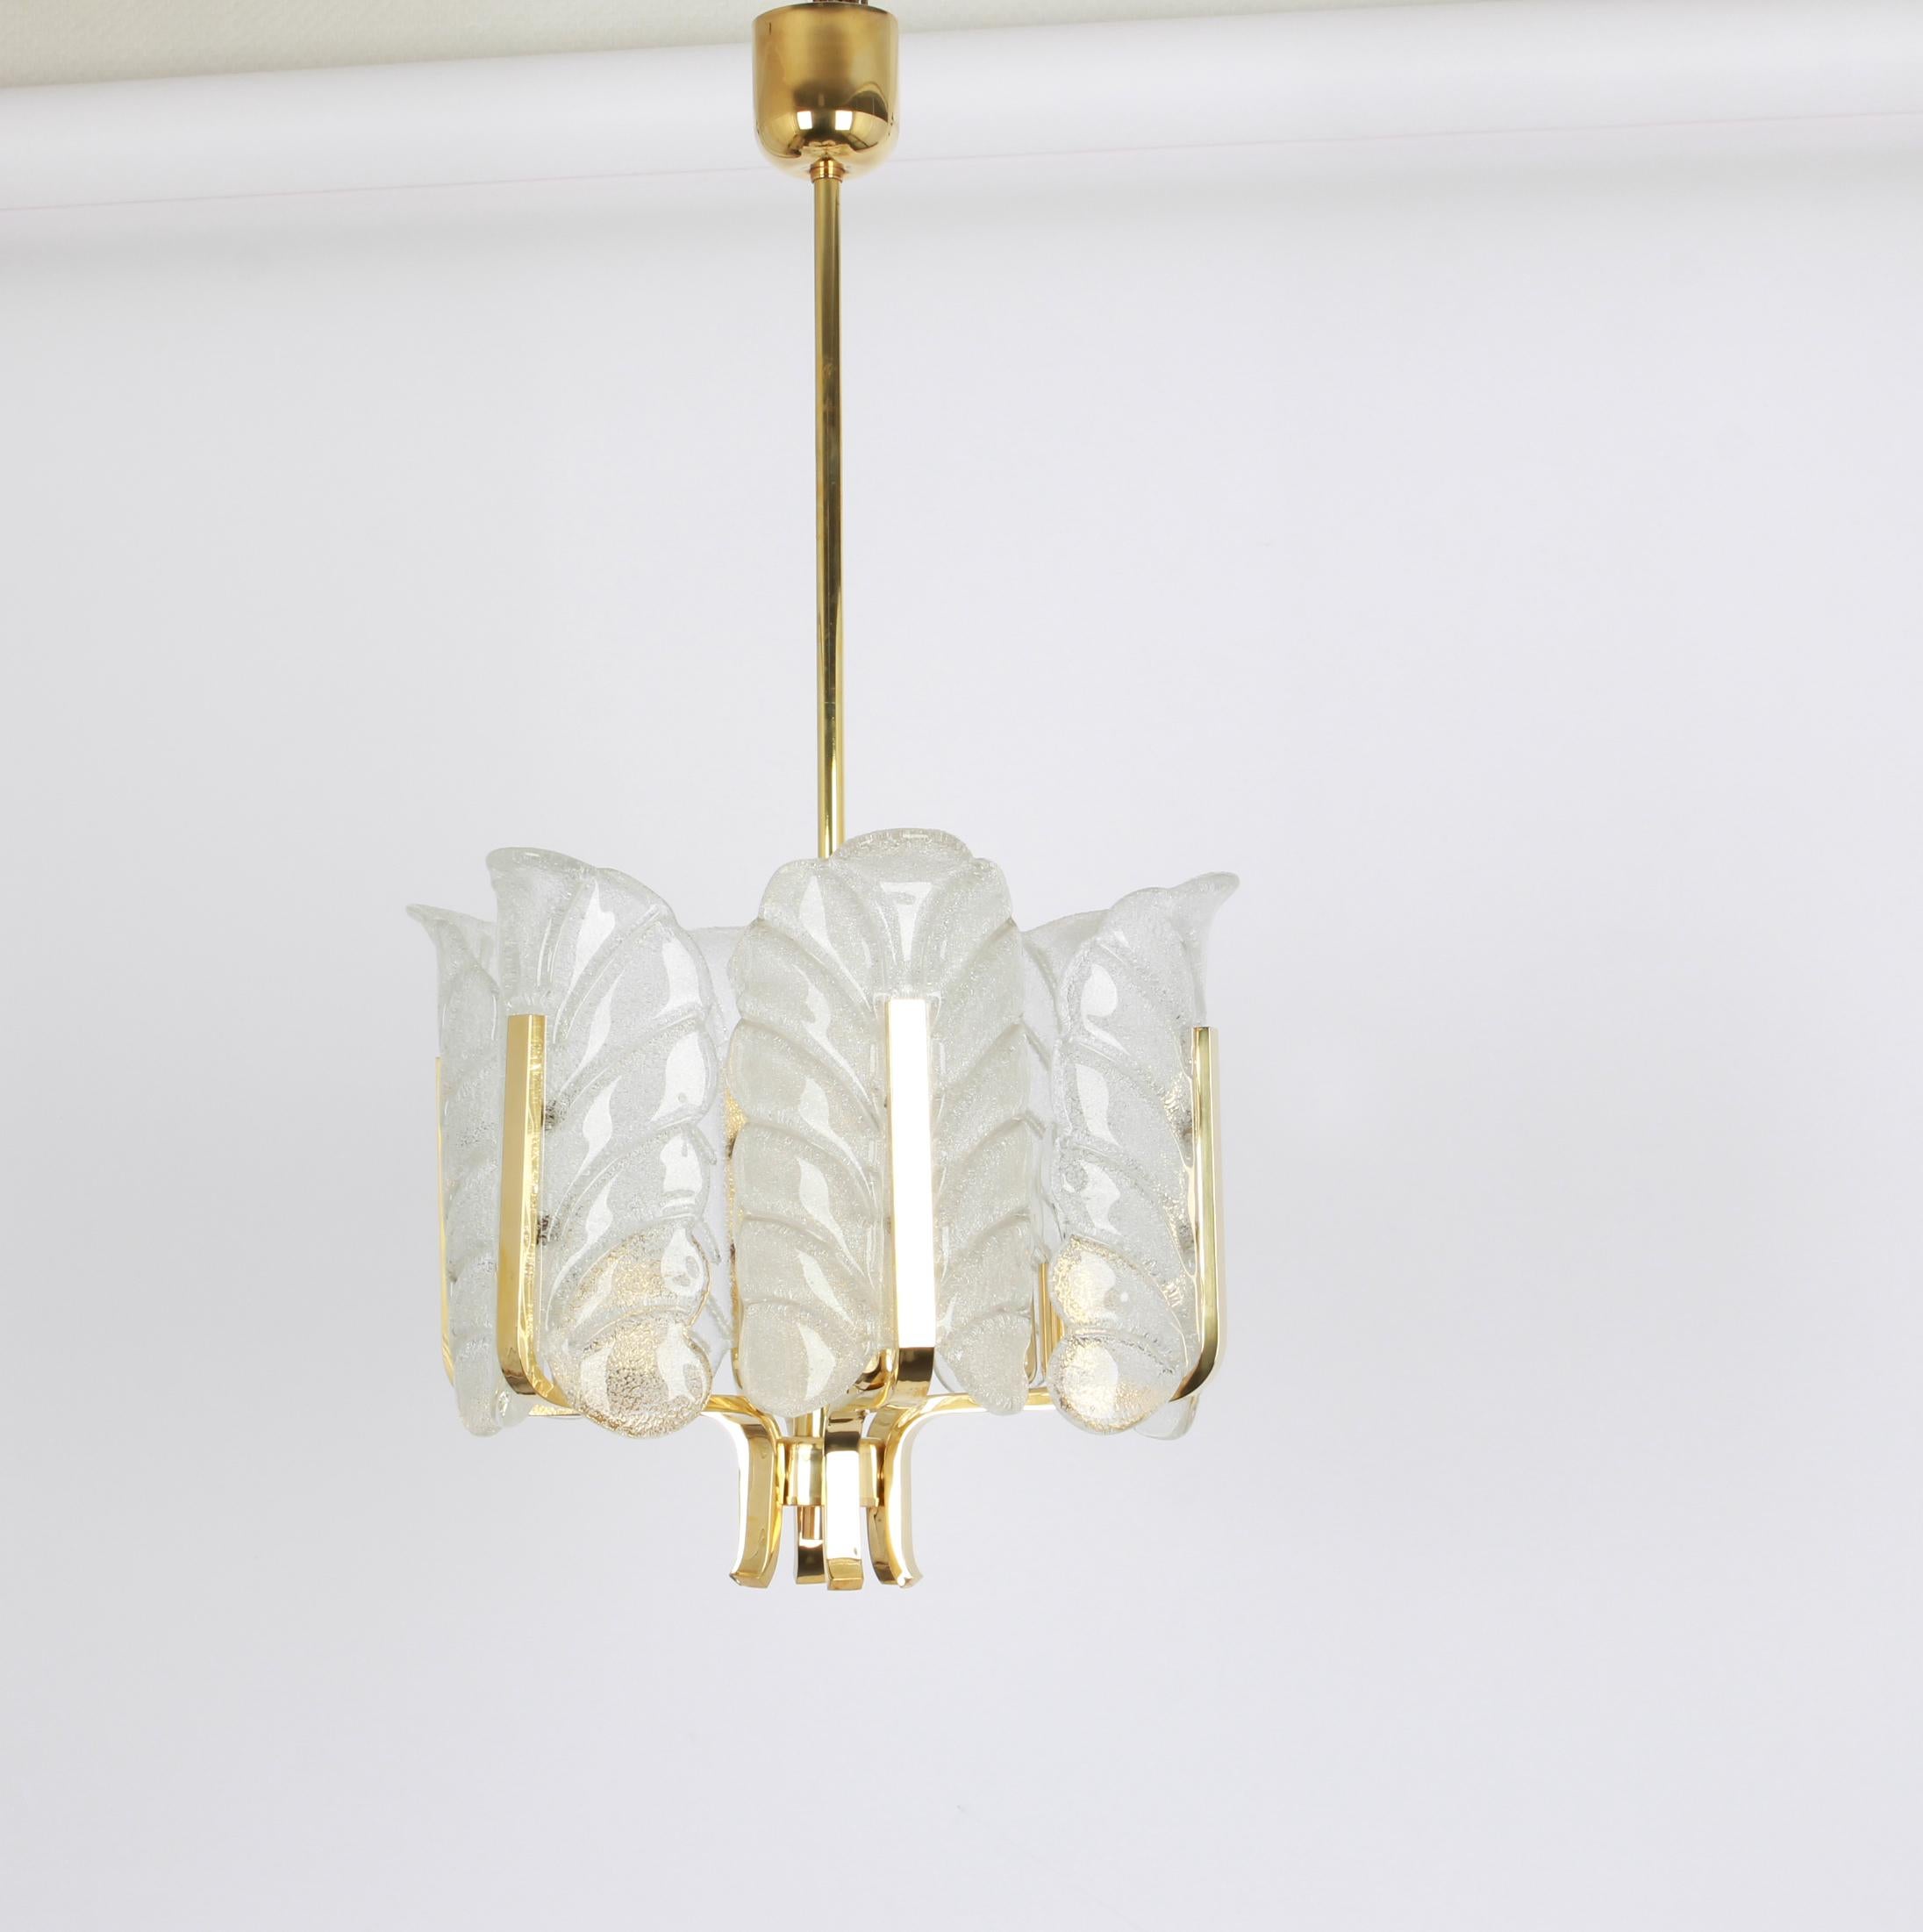 Very glamorous chandelier designed by Carl Fagerlund for Orrefors glass, Sweden, manufactured in midcentury, circa 1960-1969. The light features a polished brass frame with six stunning Murano glass leaves which have a matte frosted relief on the